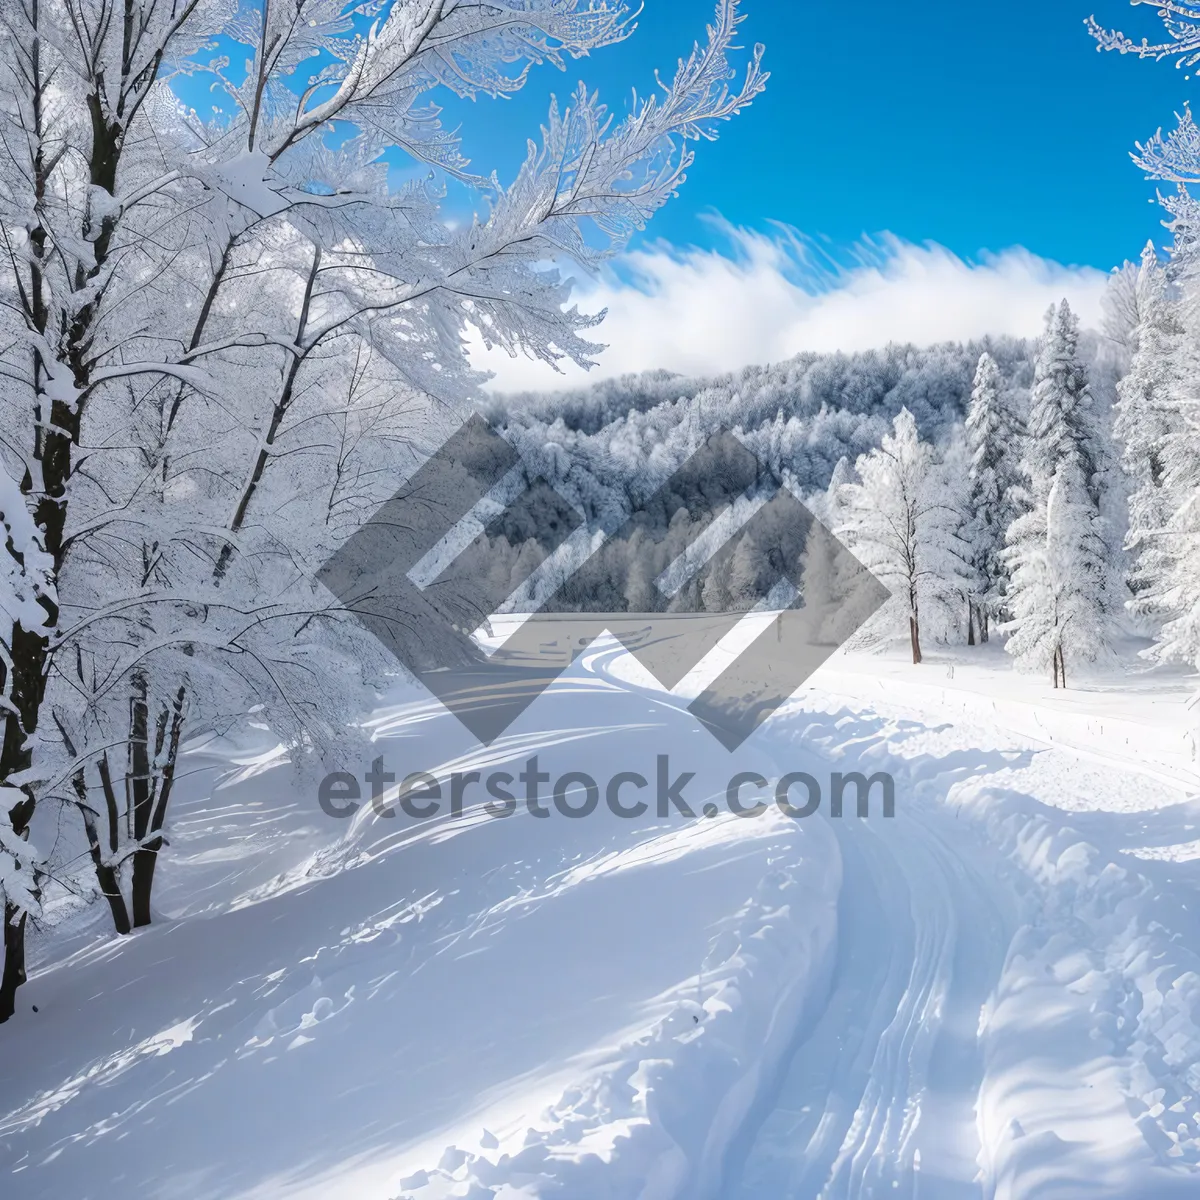 Picture of Frosty Winter Wonderland: Majestic Snow-Covered Mountains